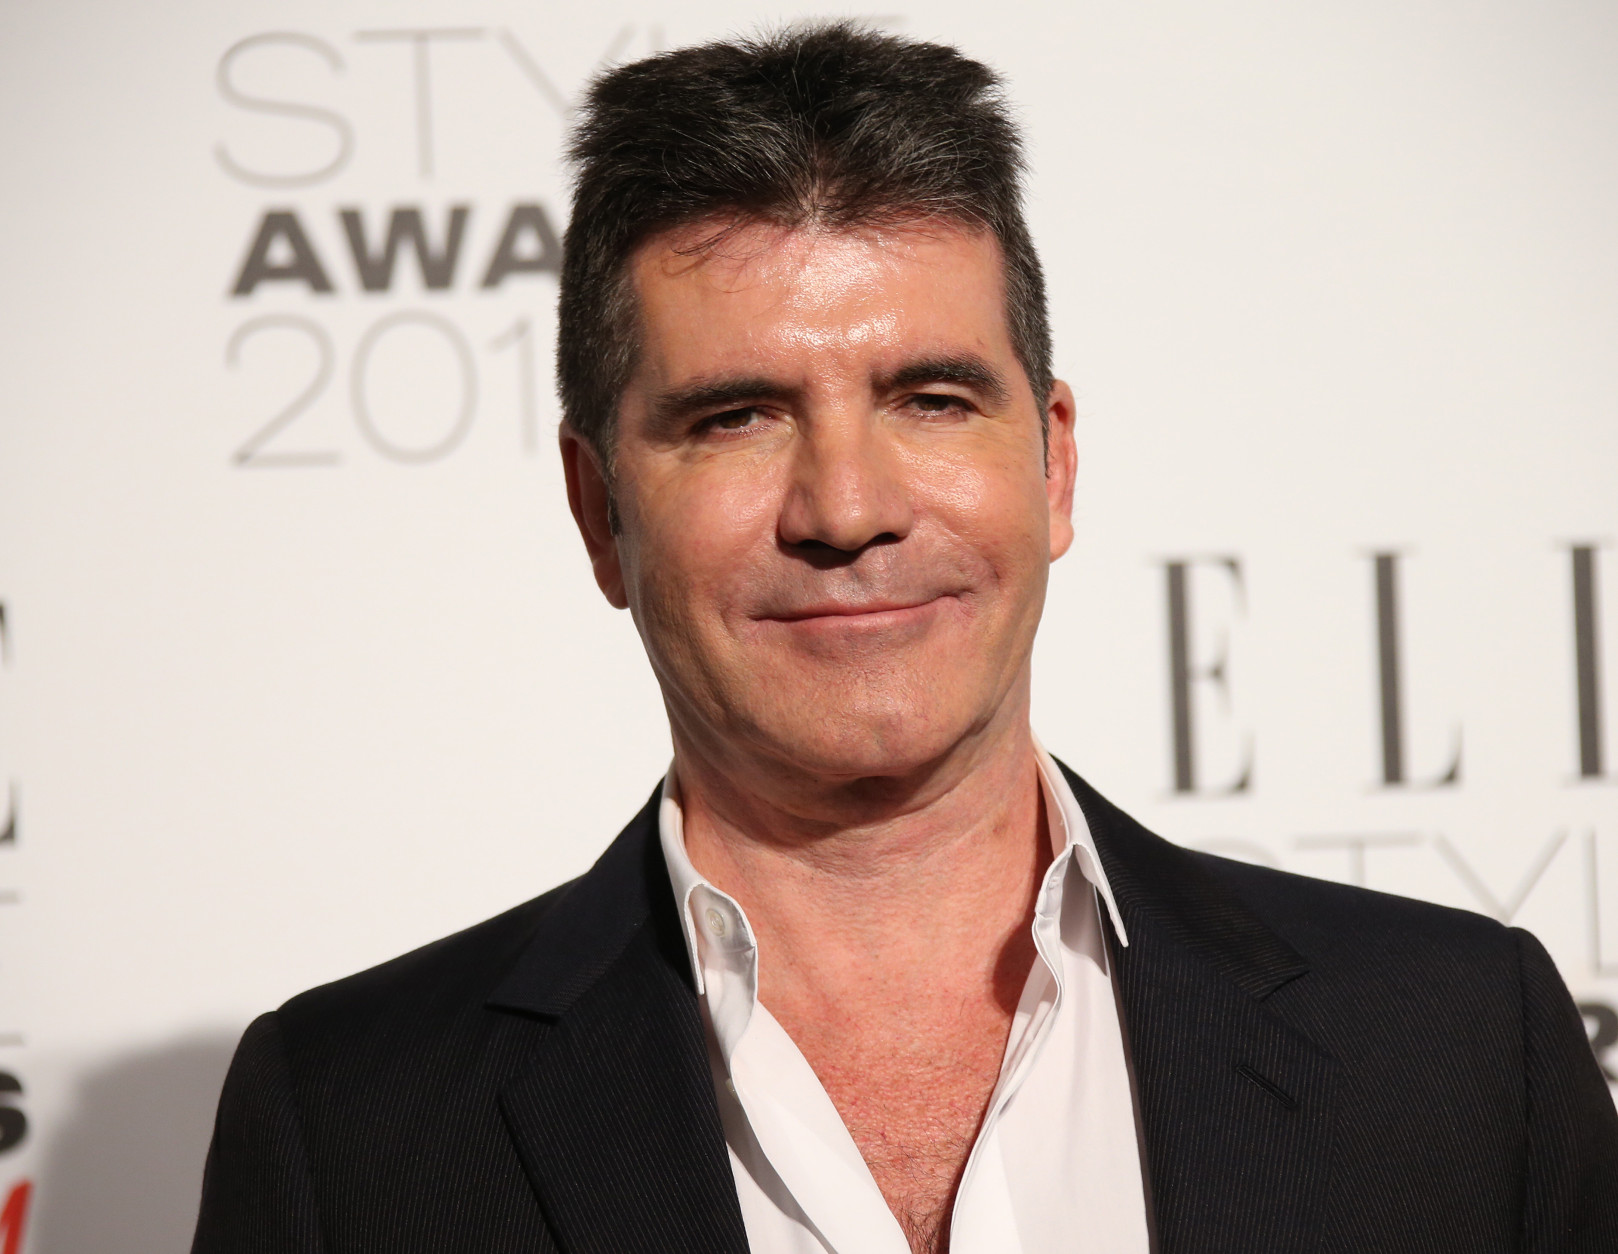 Simon Cowell poses  for photographers at the Elle Style Awards in London, Tuesday, Feb. 24, 2015. (Photo by Joel Ryan/Invision/AP)